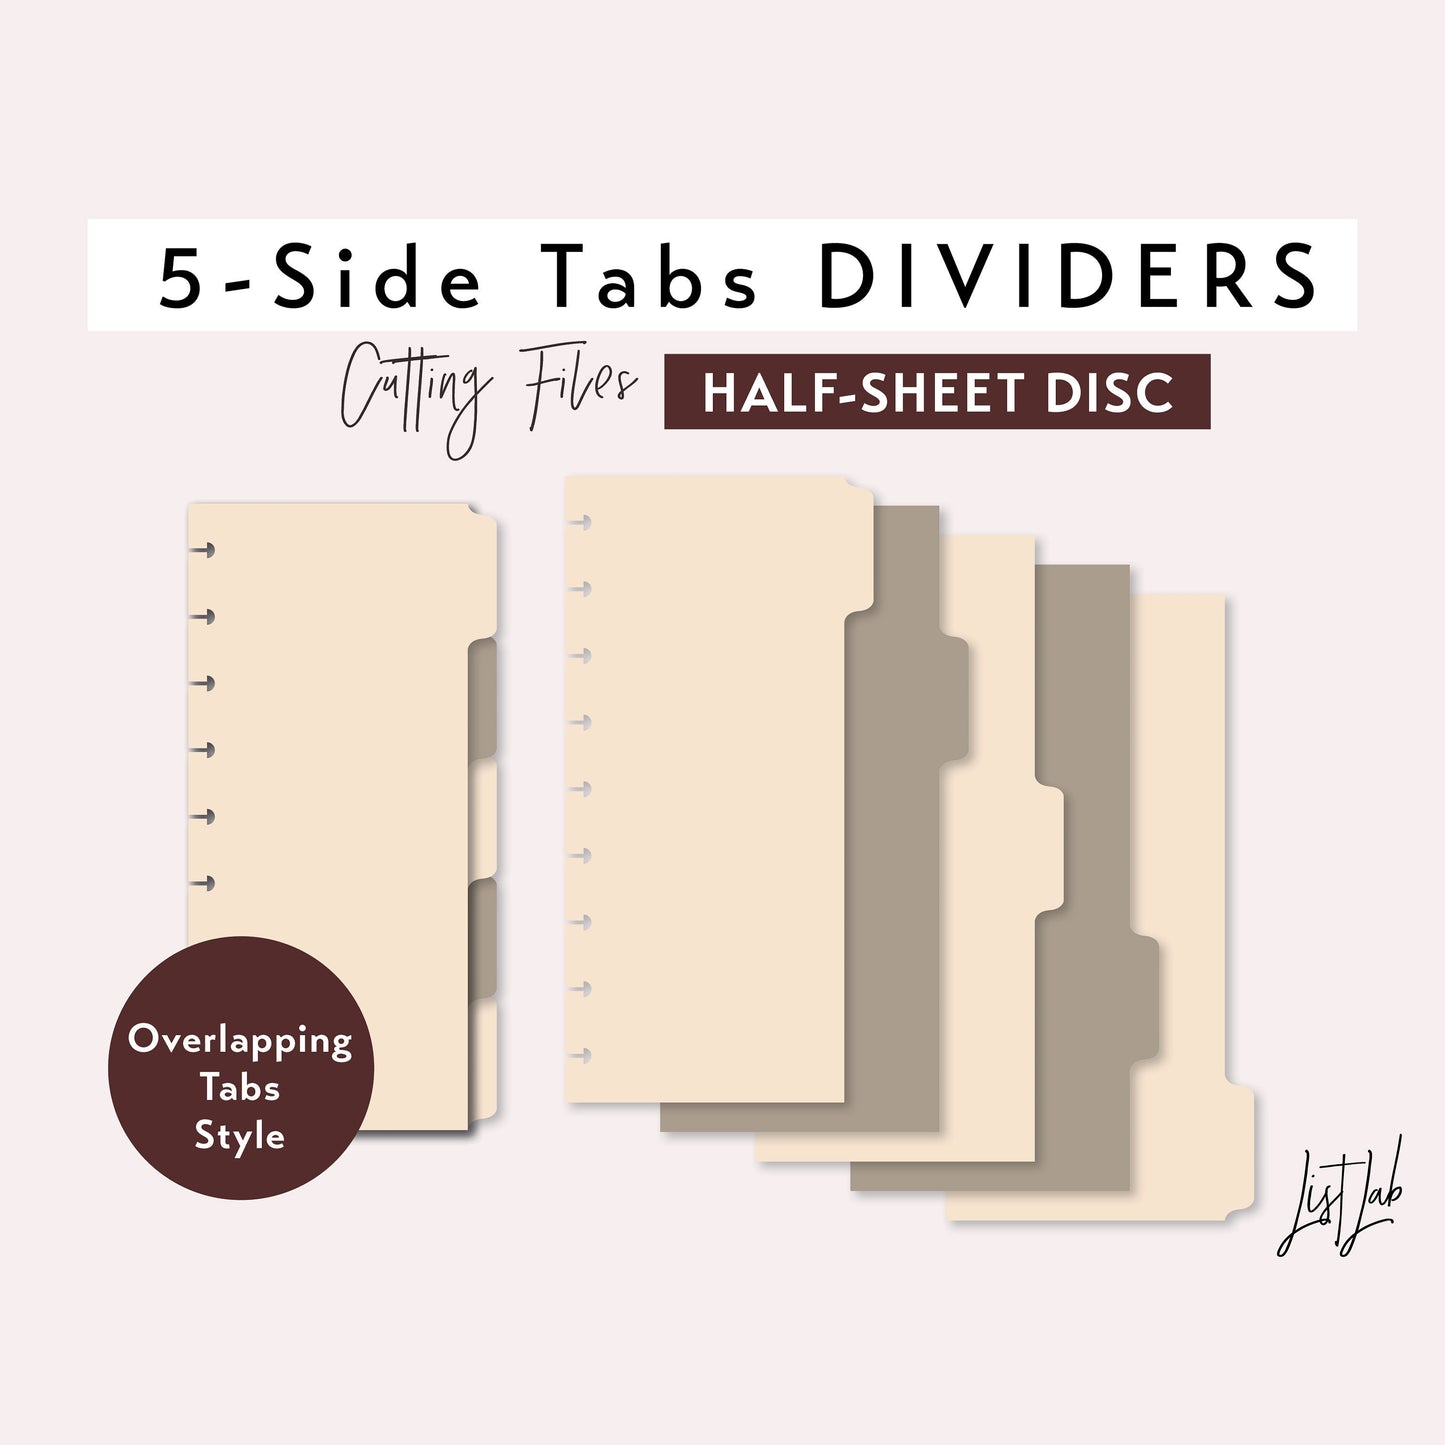 Half-Sheet / Skinny Classic Discbound 5-SIDE Tab Dividers Cutting Files Set